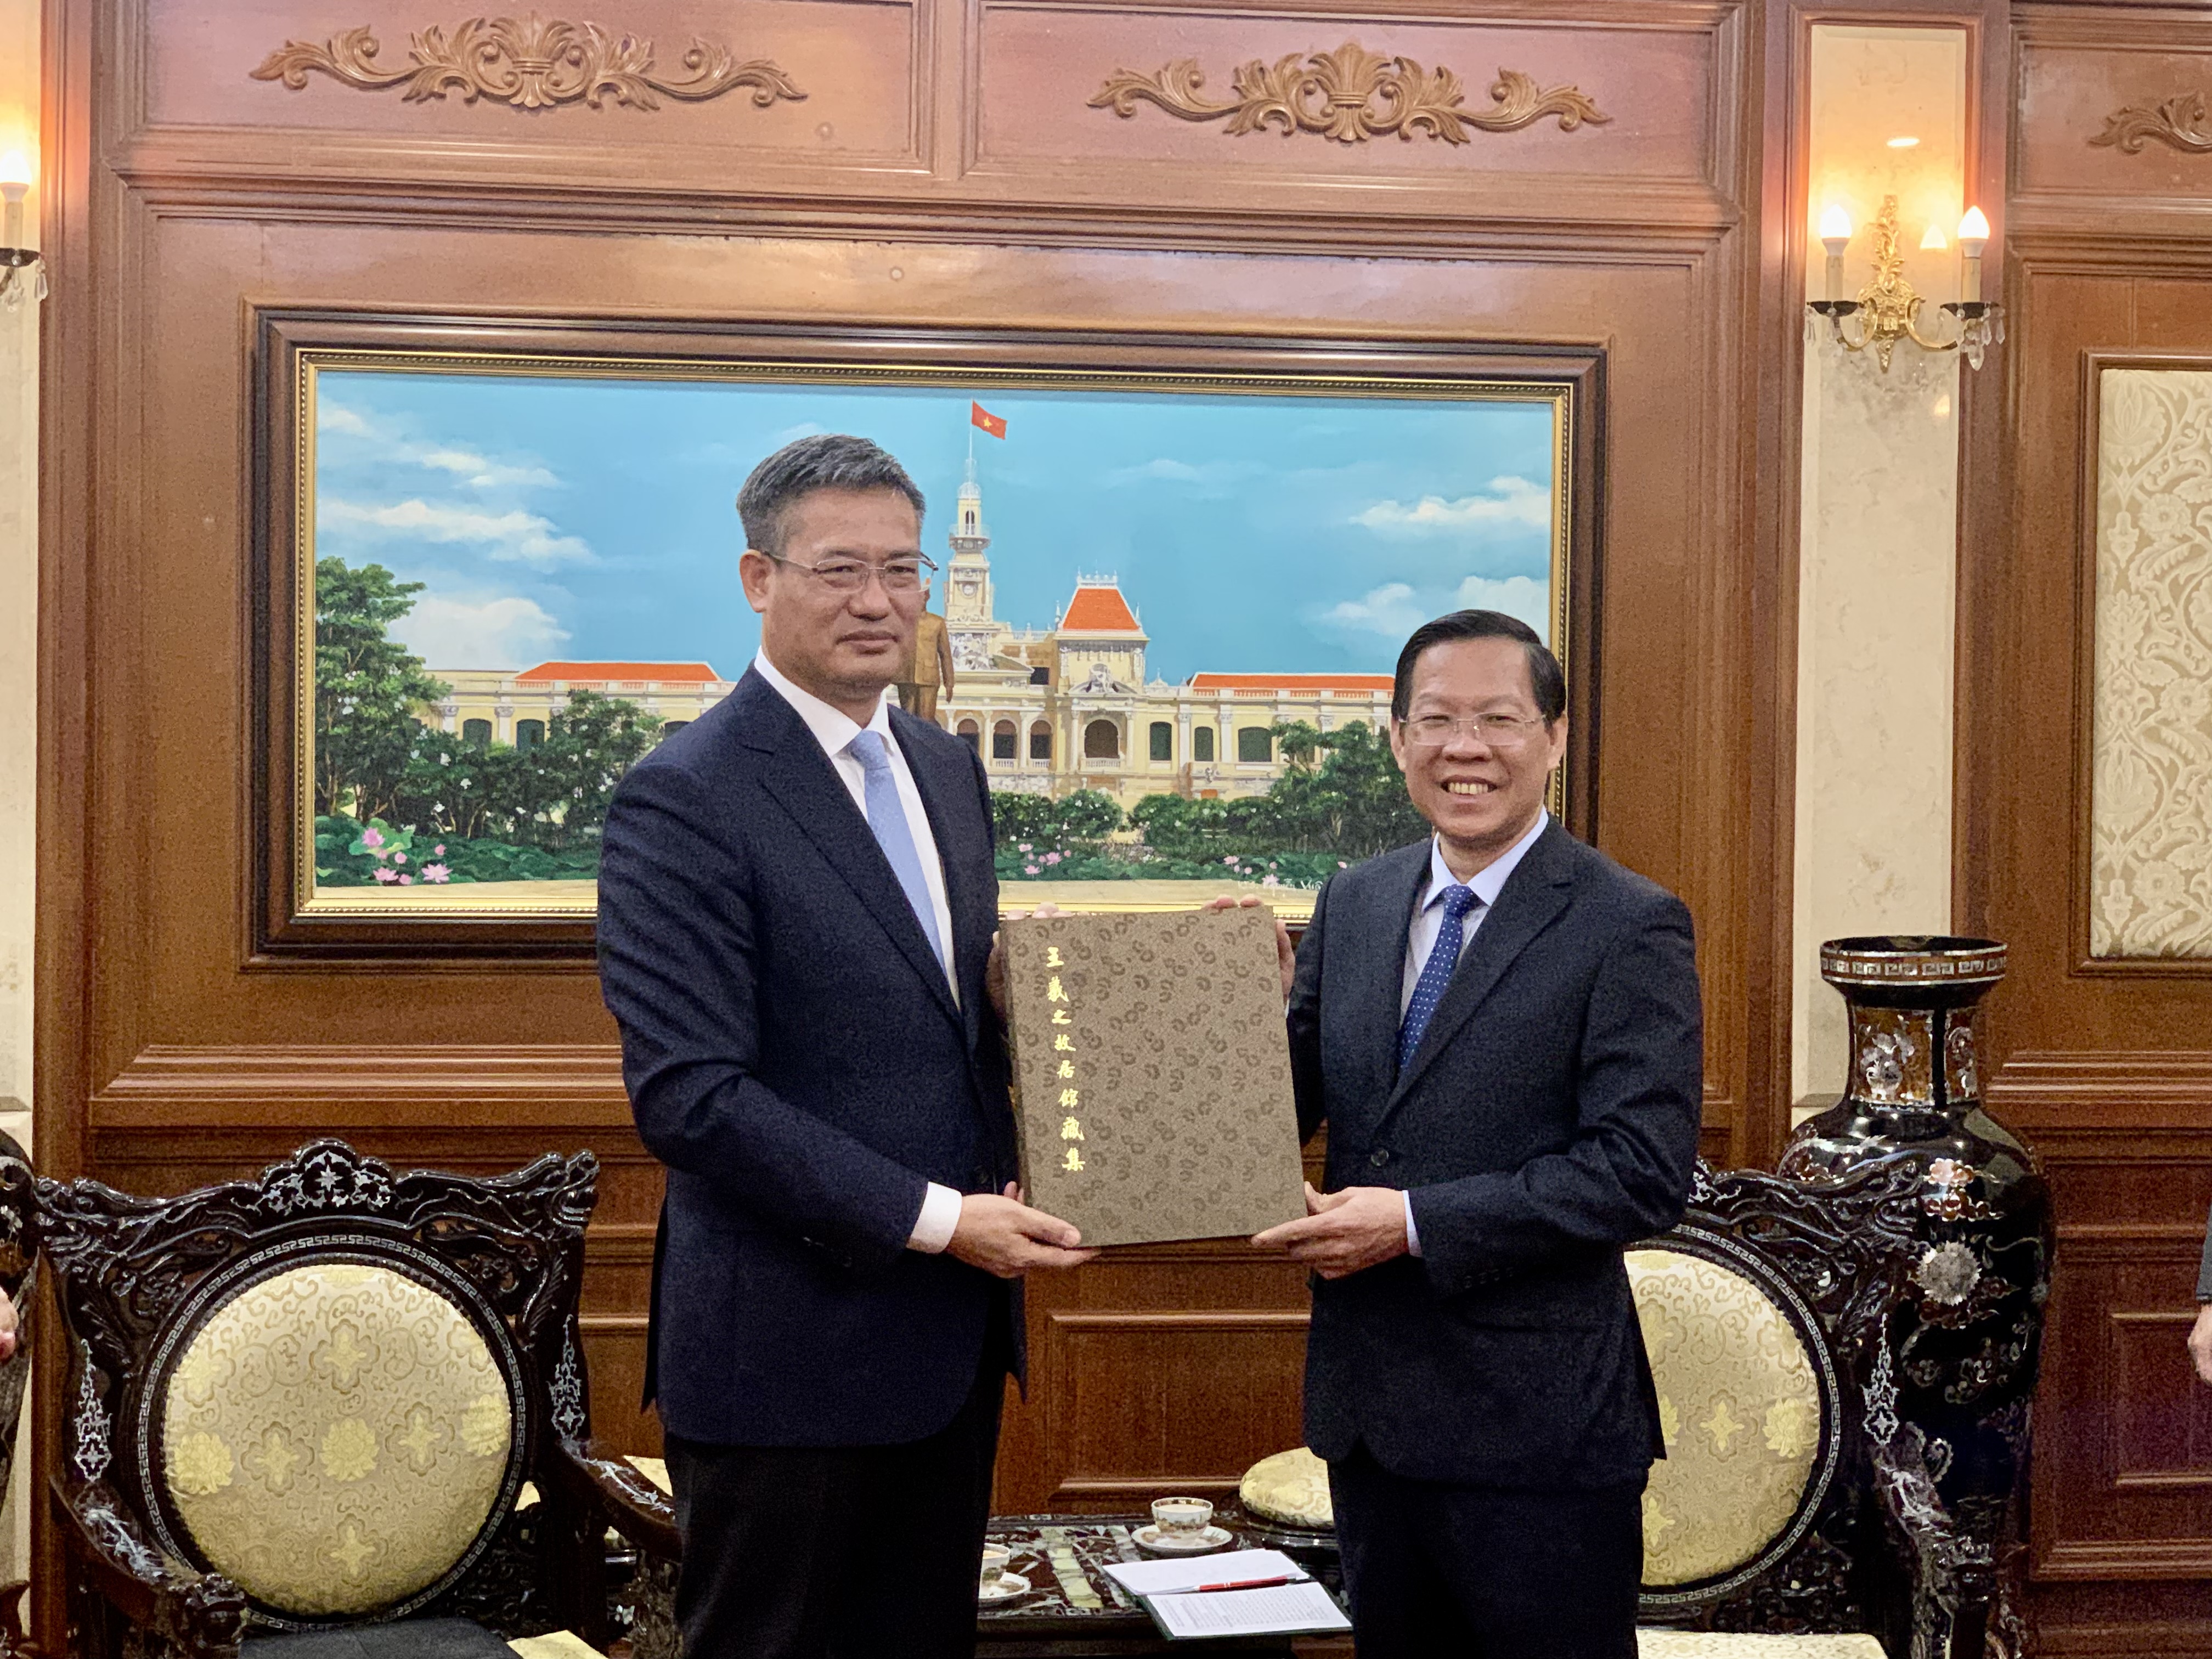 Chinese Consul General to Ho Chi Minh City Wei Huaxiang (L) presents a gift to Ho Chi Minh City chairman Phan Van Mai, July 7, 2022. Photo: Bao Anh / Tuoi Tre